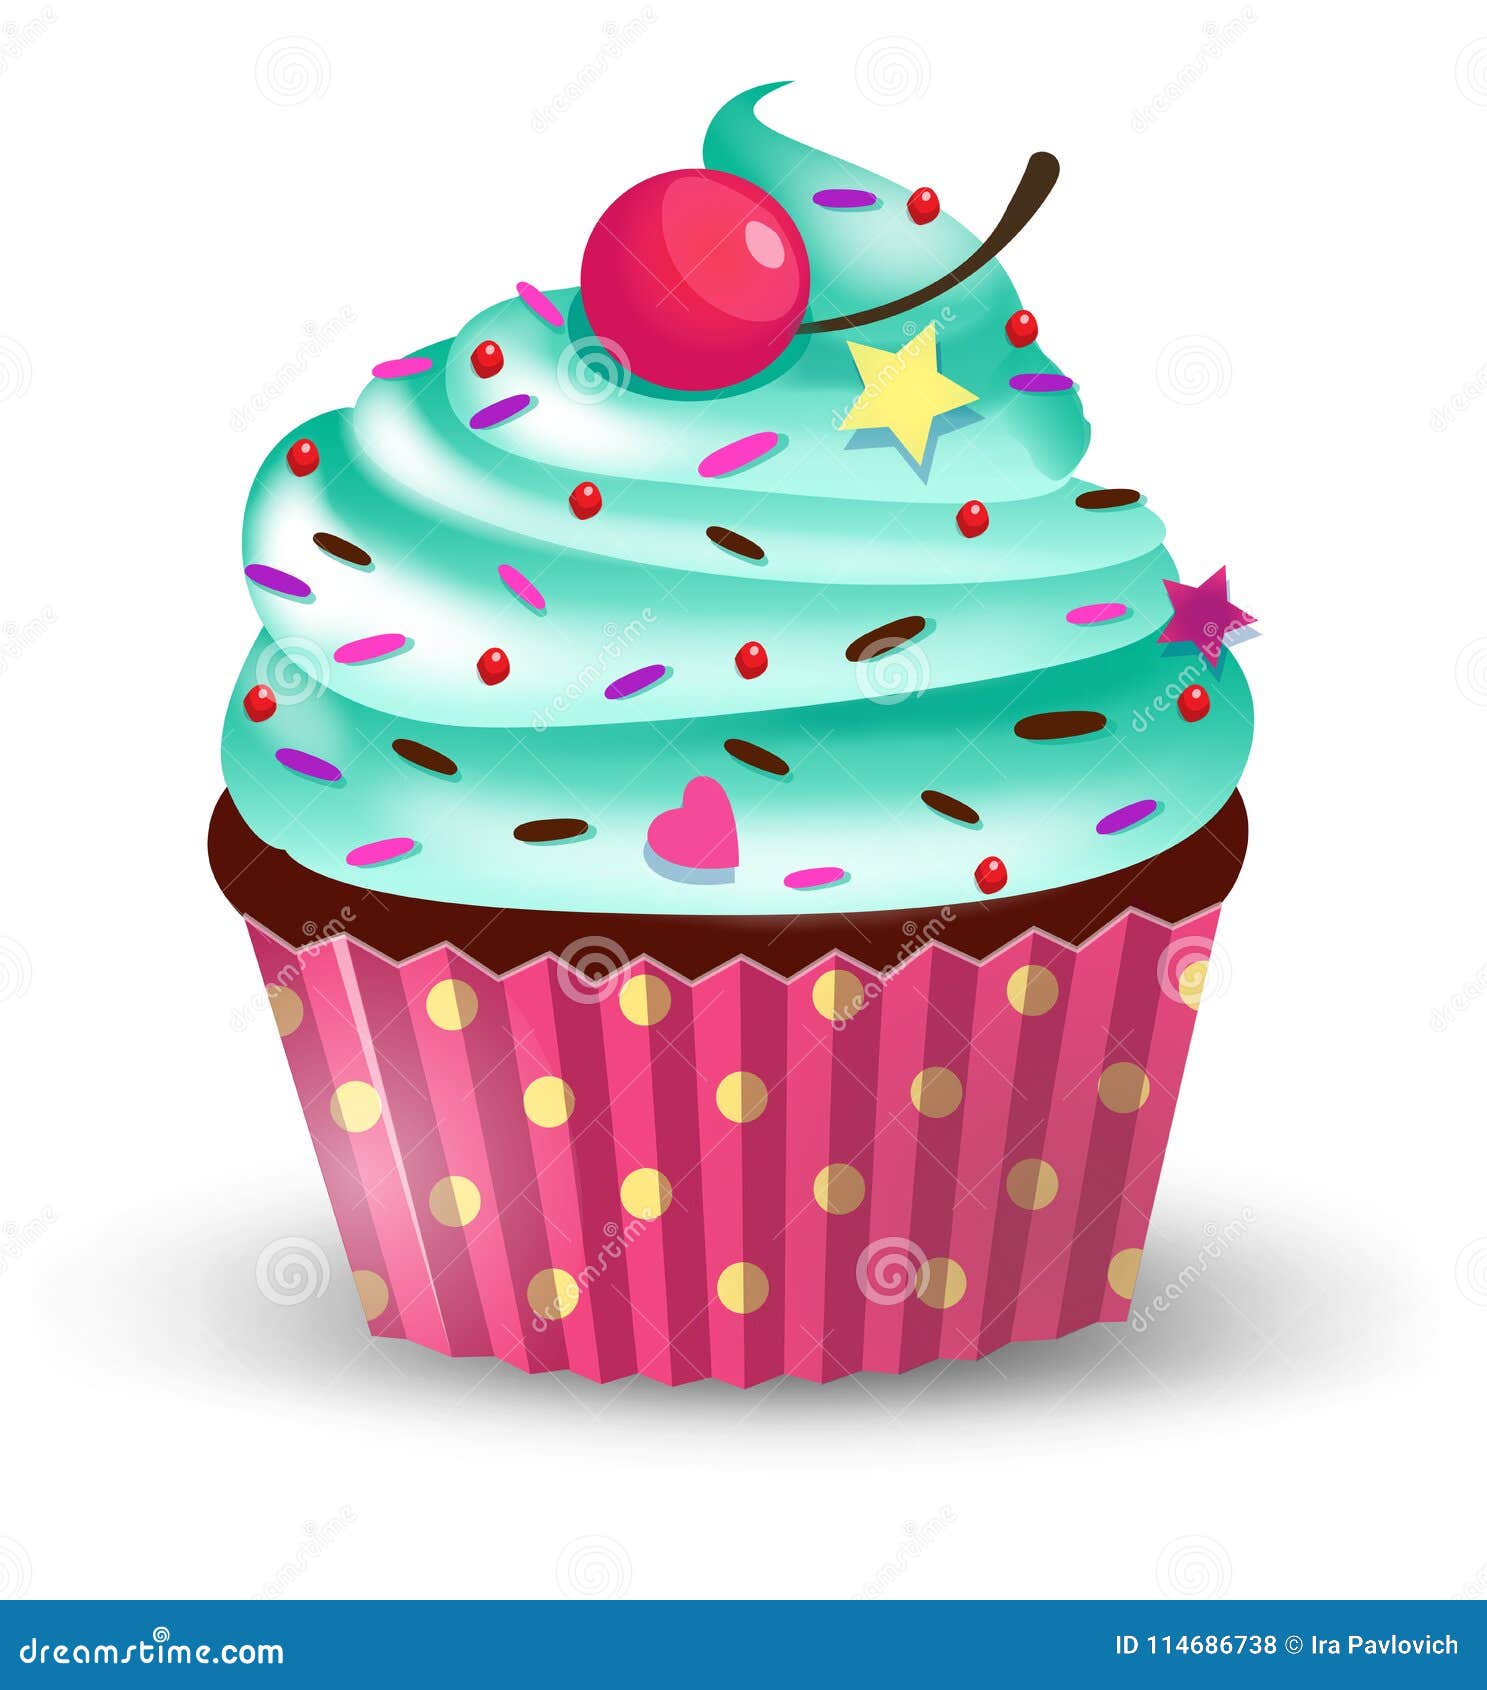 Cartoon Cakes. Colorful Delicious Desserts, Birthday Cake with Celebration  Candles and Chocolate Slices, Holiday Stock Vector - Illustration of cute,  cupcakes: 169757130